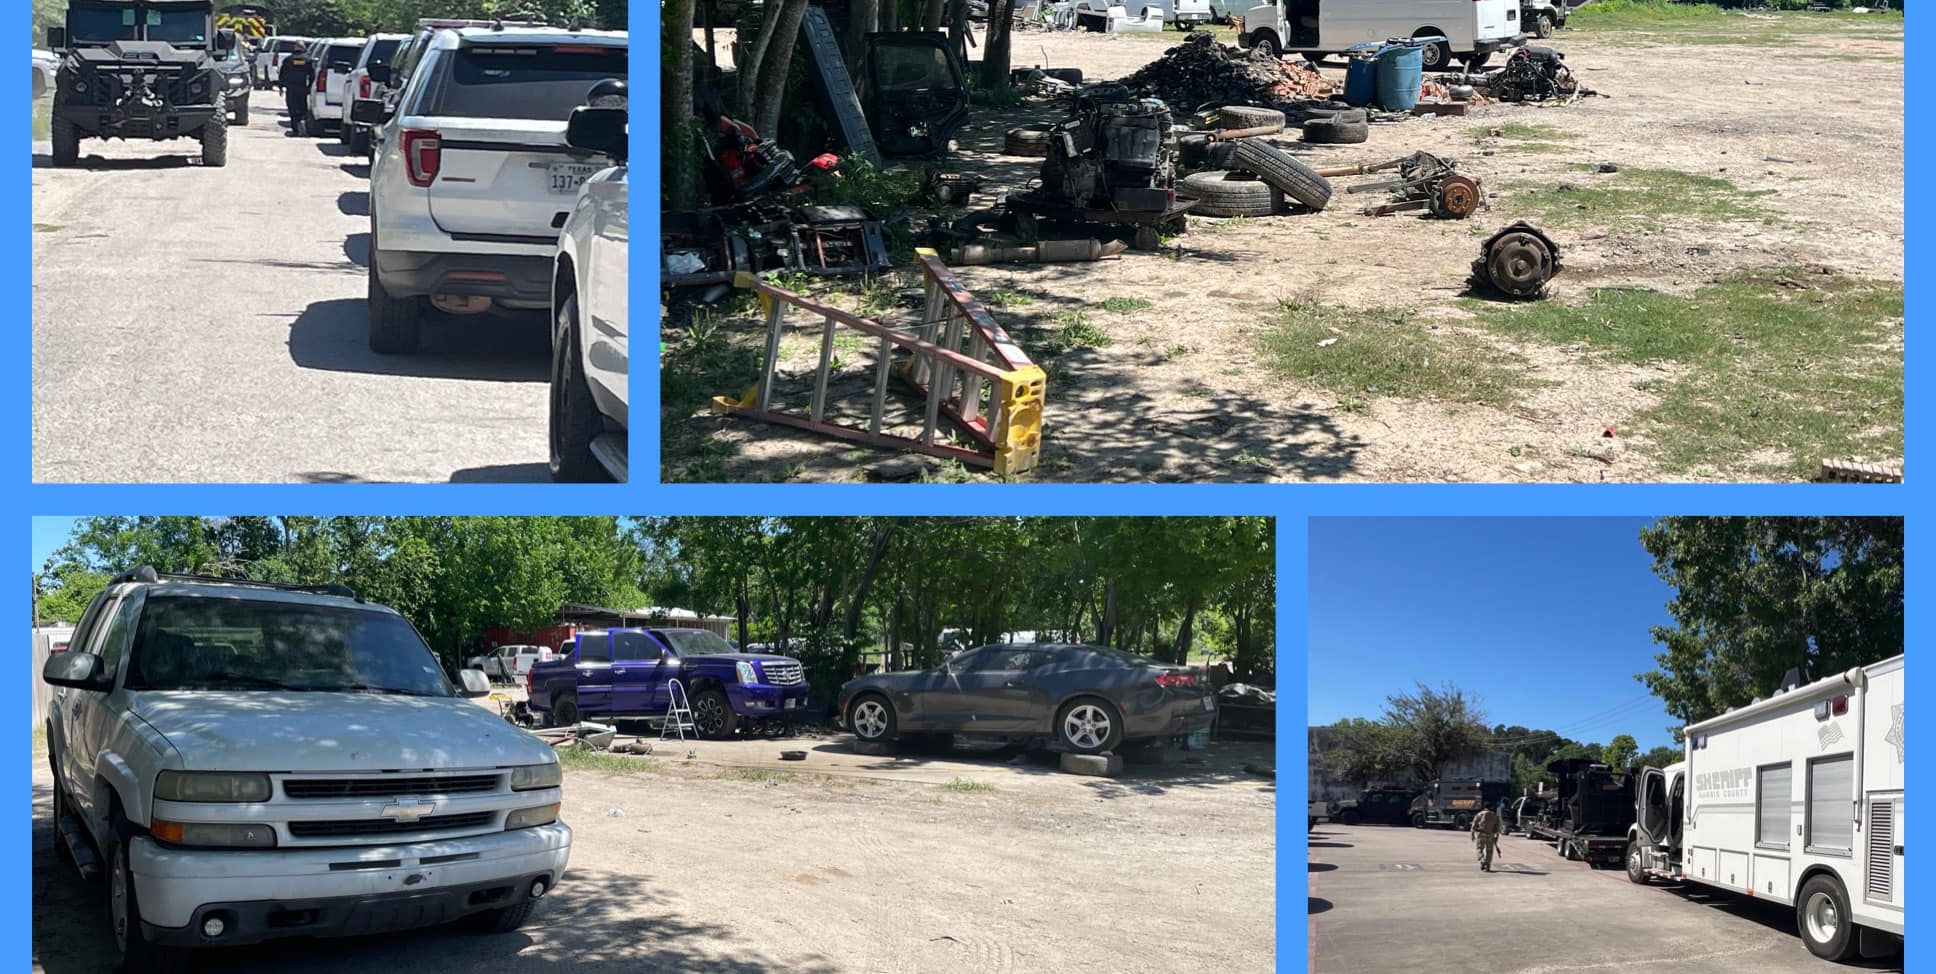 $1 Million Worth of Stolen Vehicles Recovered in Texas 'Chop-Shop' Bust, 3 Arrested